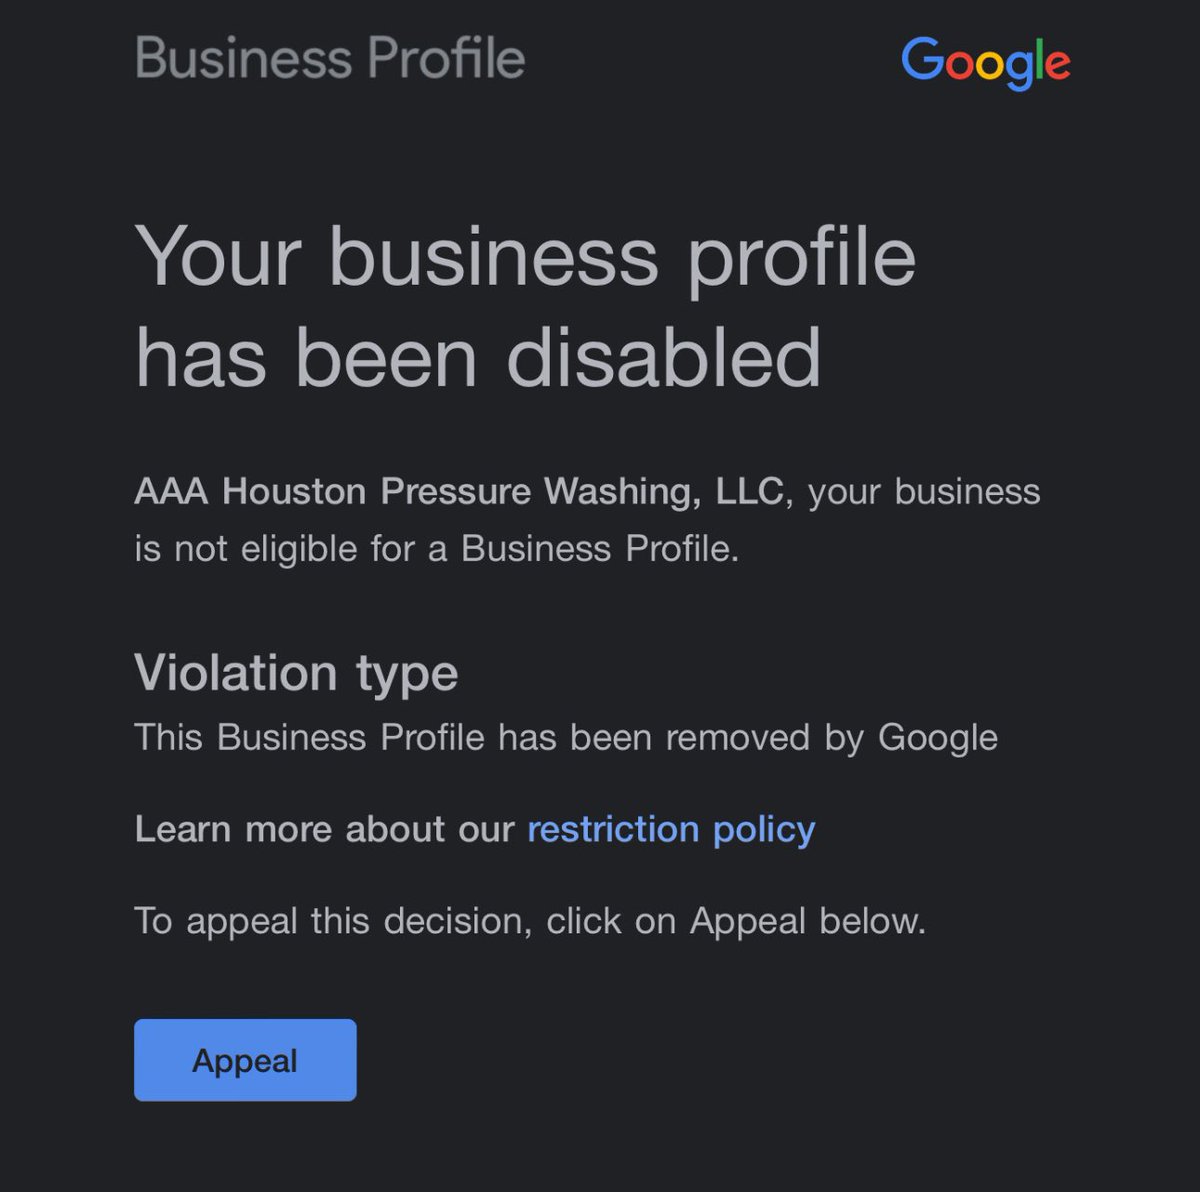 'Hey @Google, after 14 years of a solid business profile, why the sudden removal? I've provided all legit documentation, yet no reinstatement. What gives? #GoogleMyBusiness #HelpNeeded'